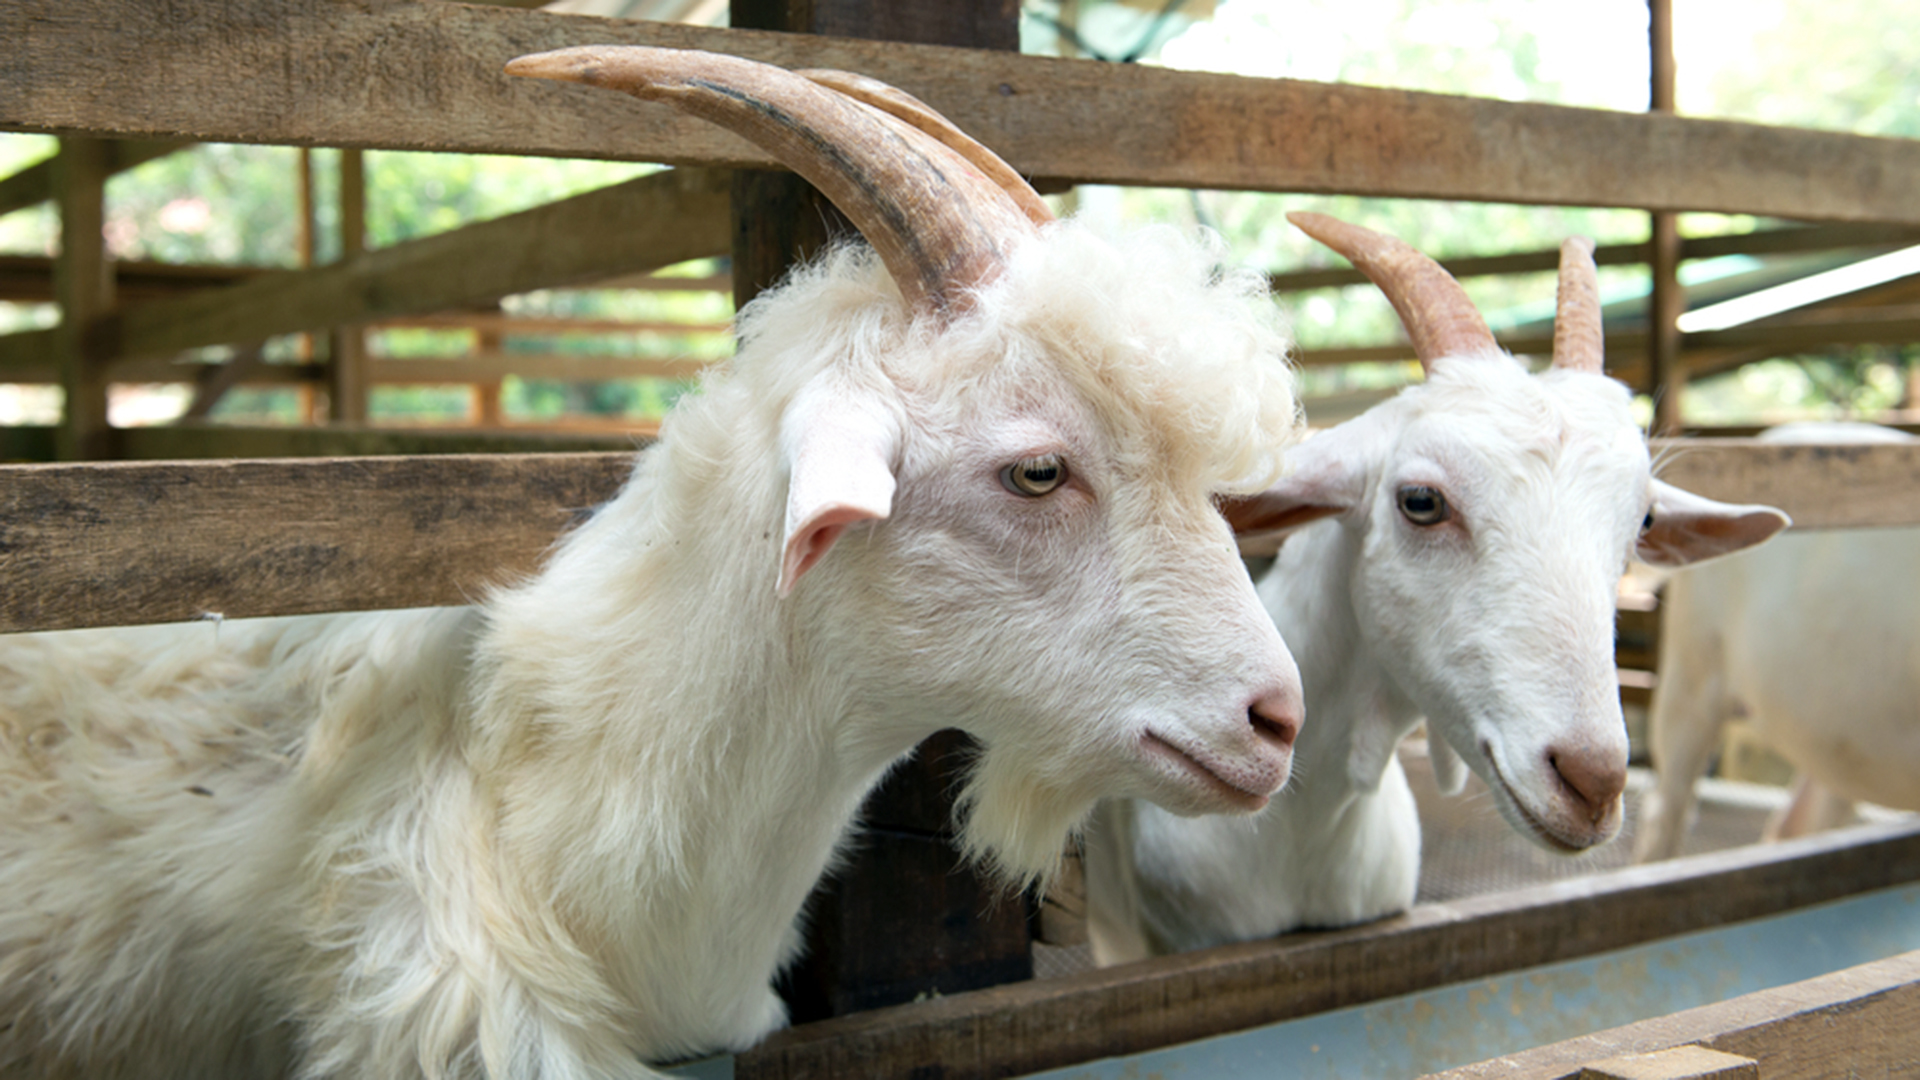 Alabama couple to give away goat farm to essay winner